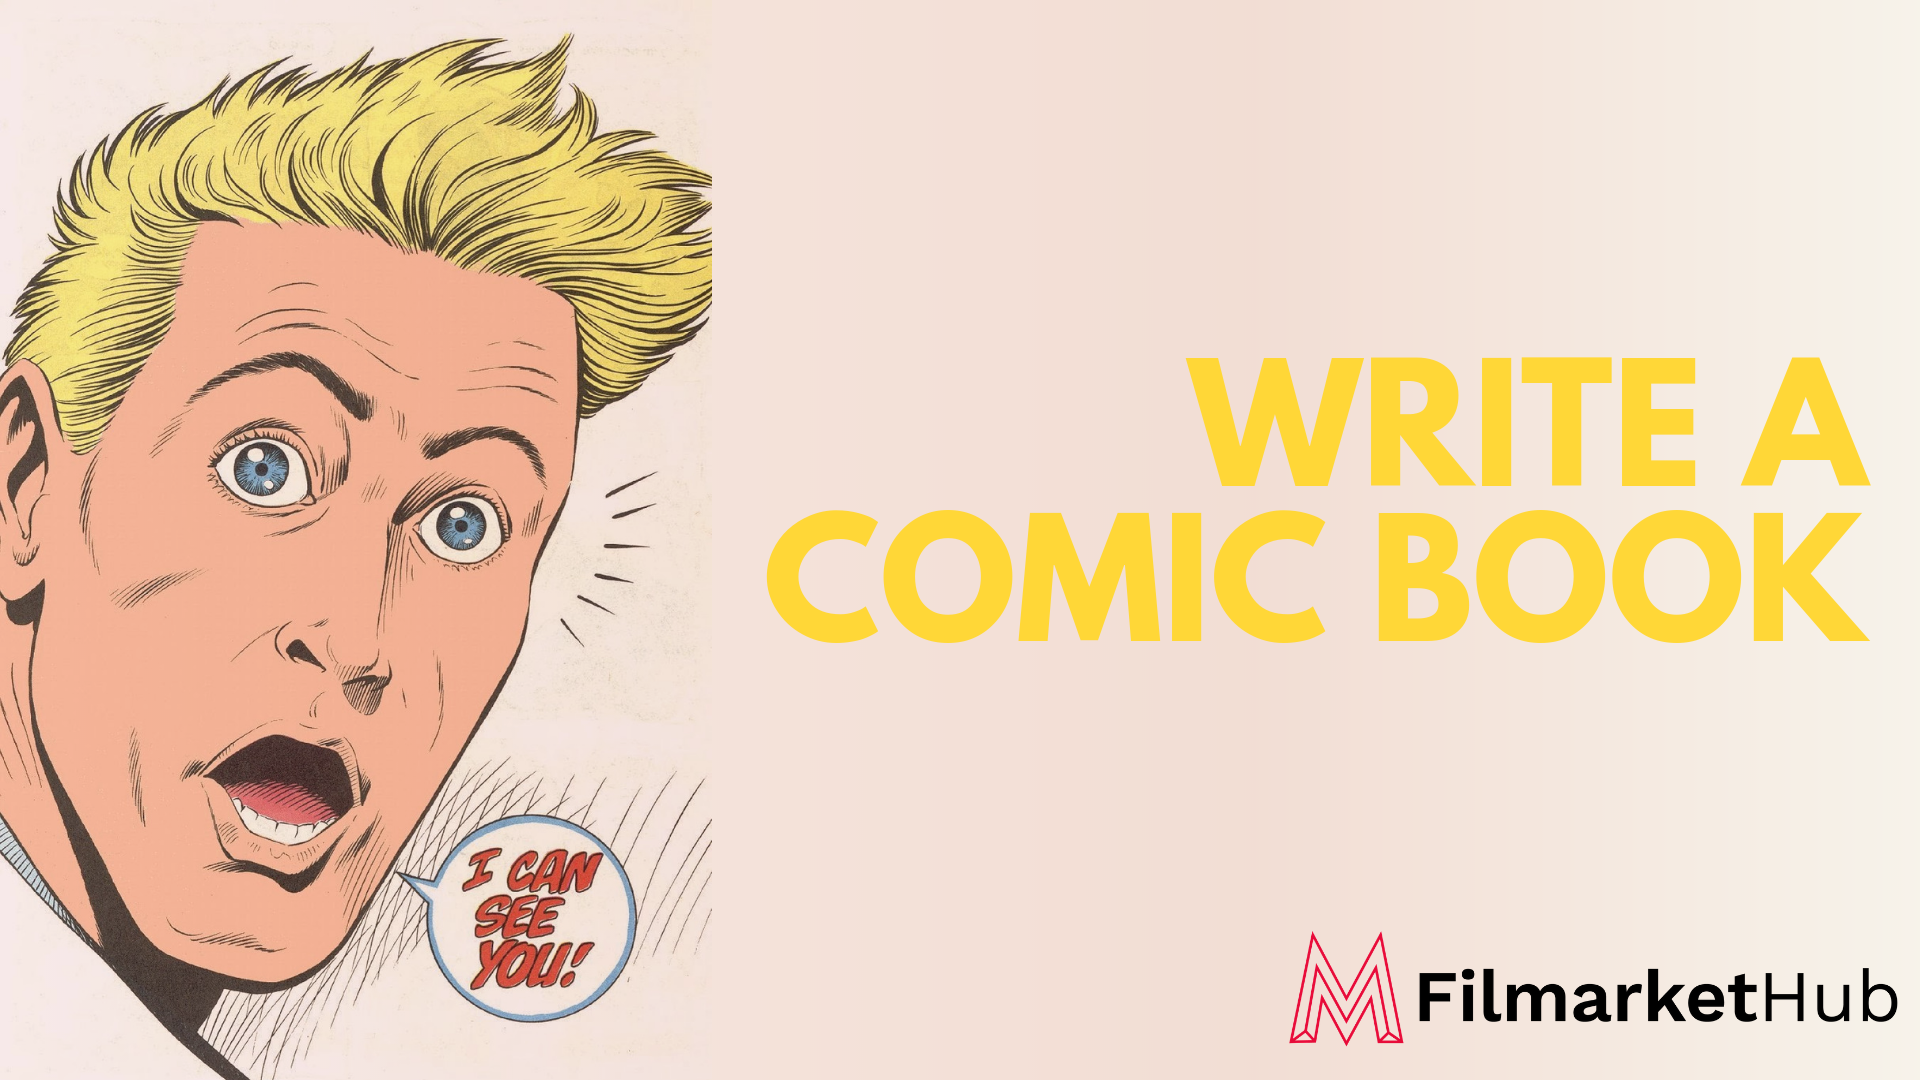 WRITE A COMIC BOOK. Screenwriters need to expand their  by Fede